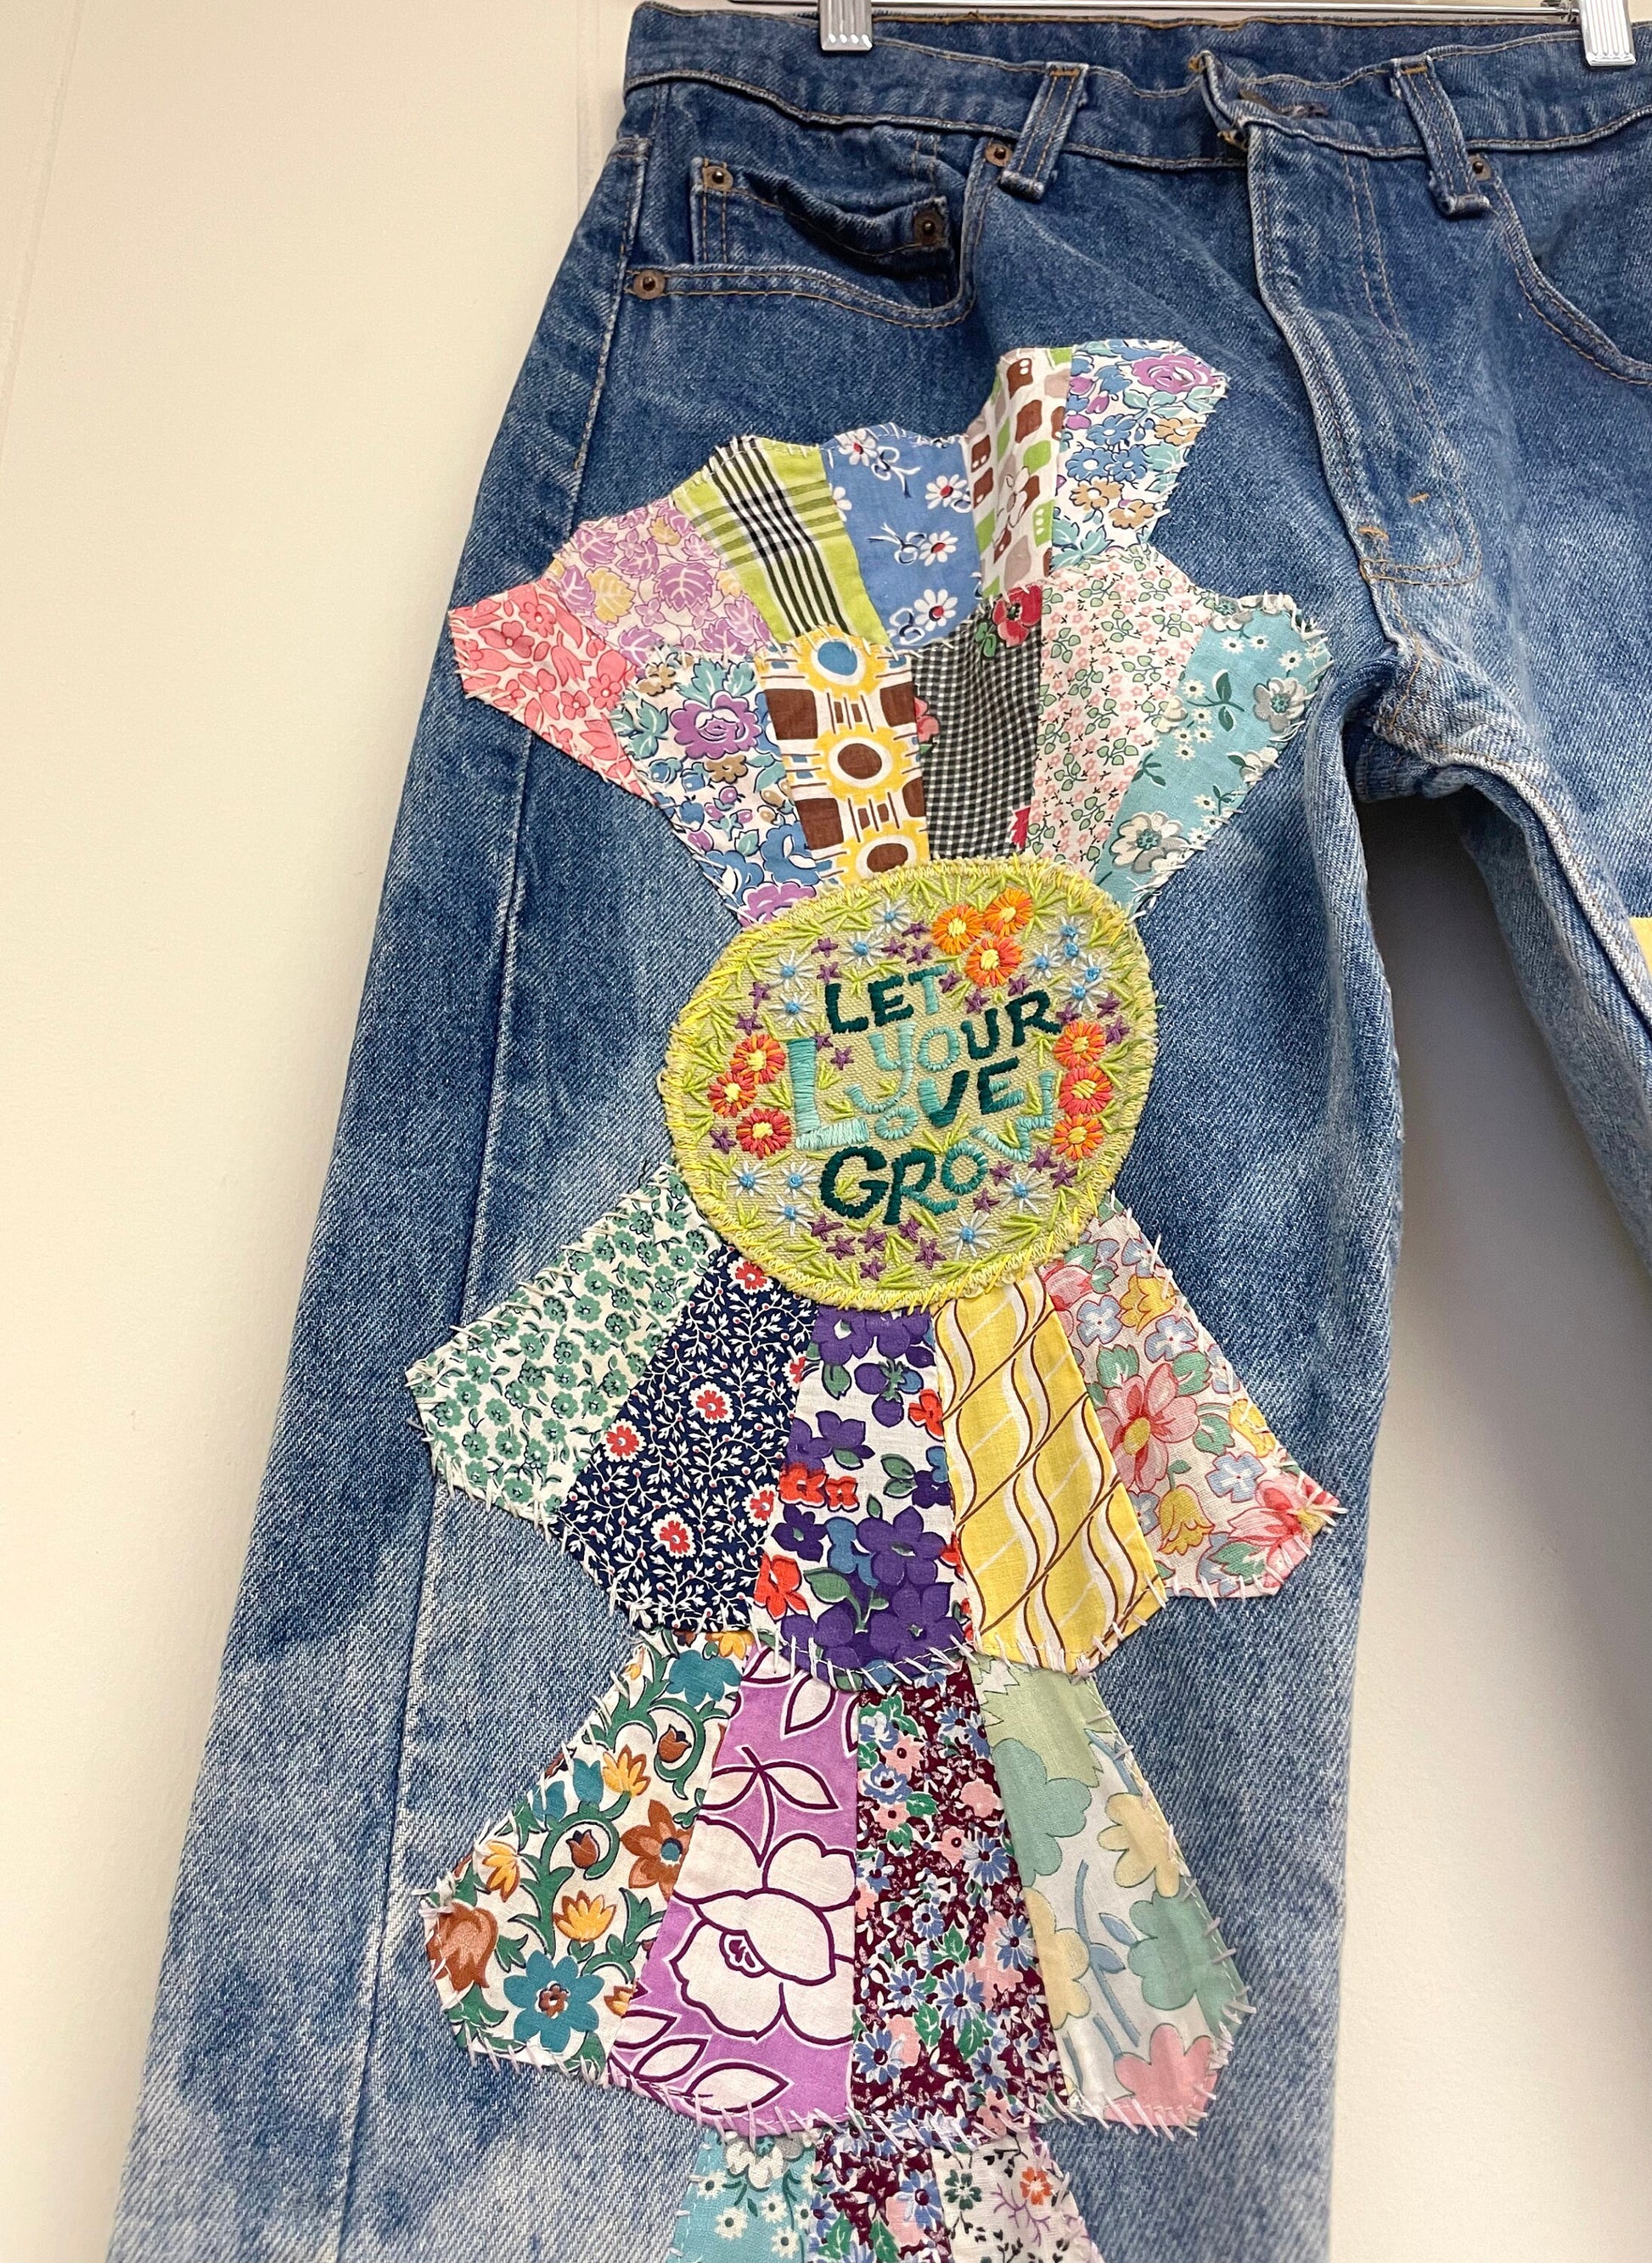 a pair of jeans with a patchwork design on them